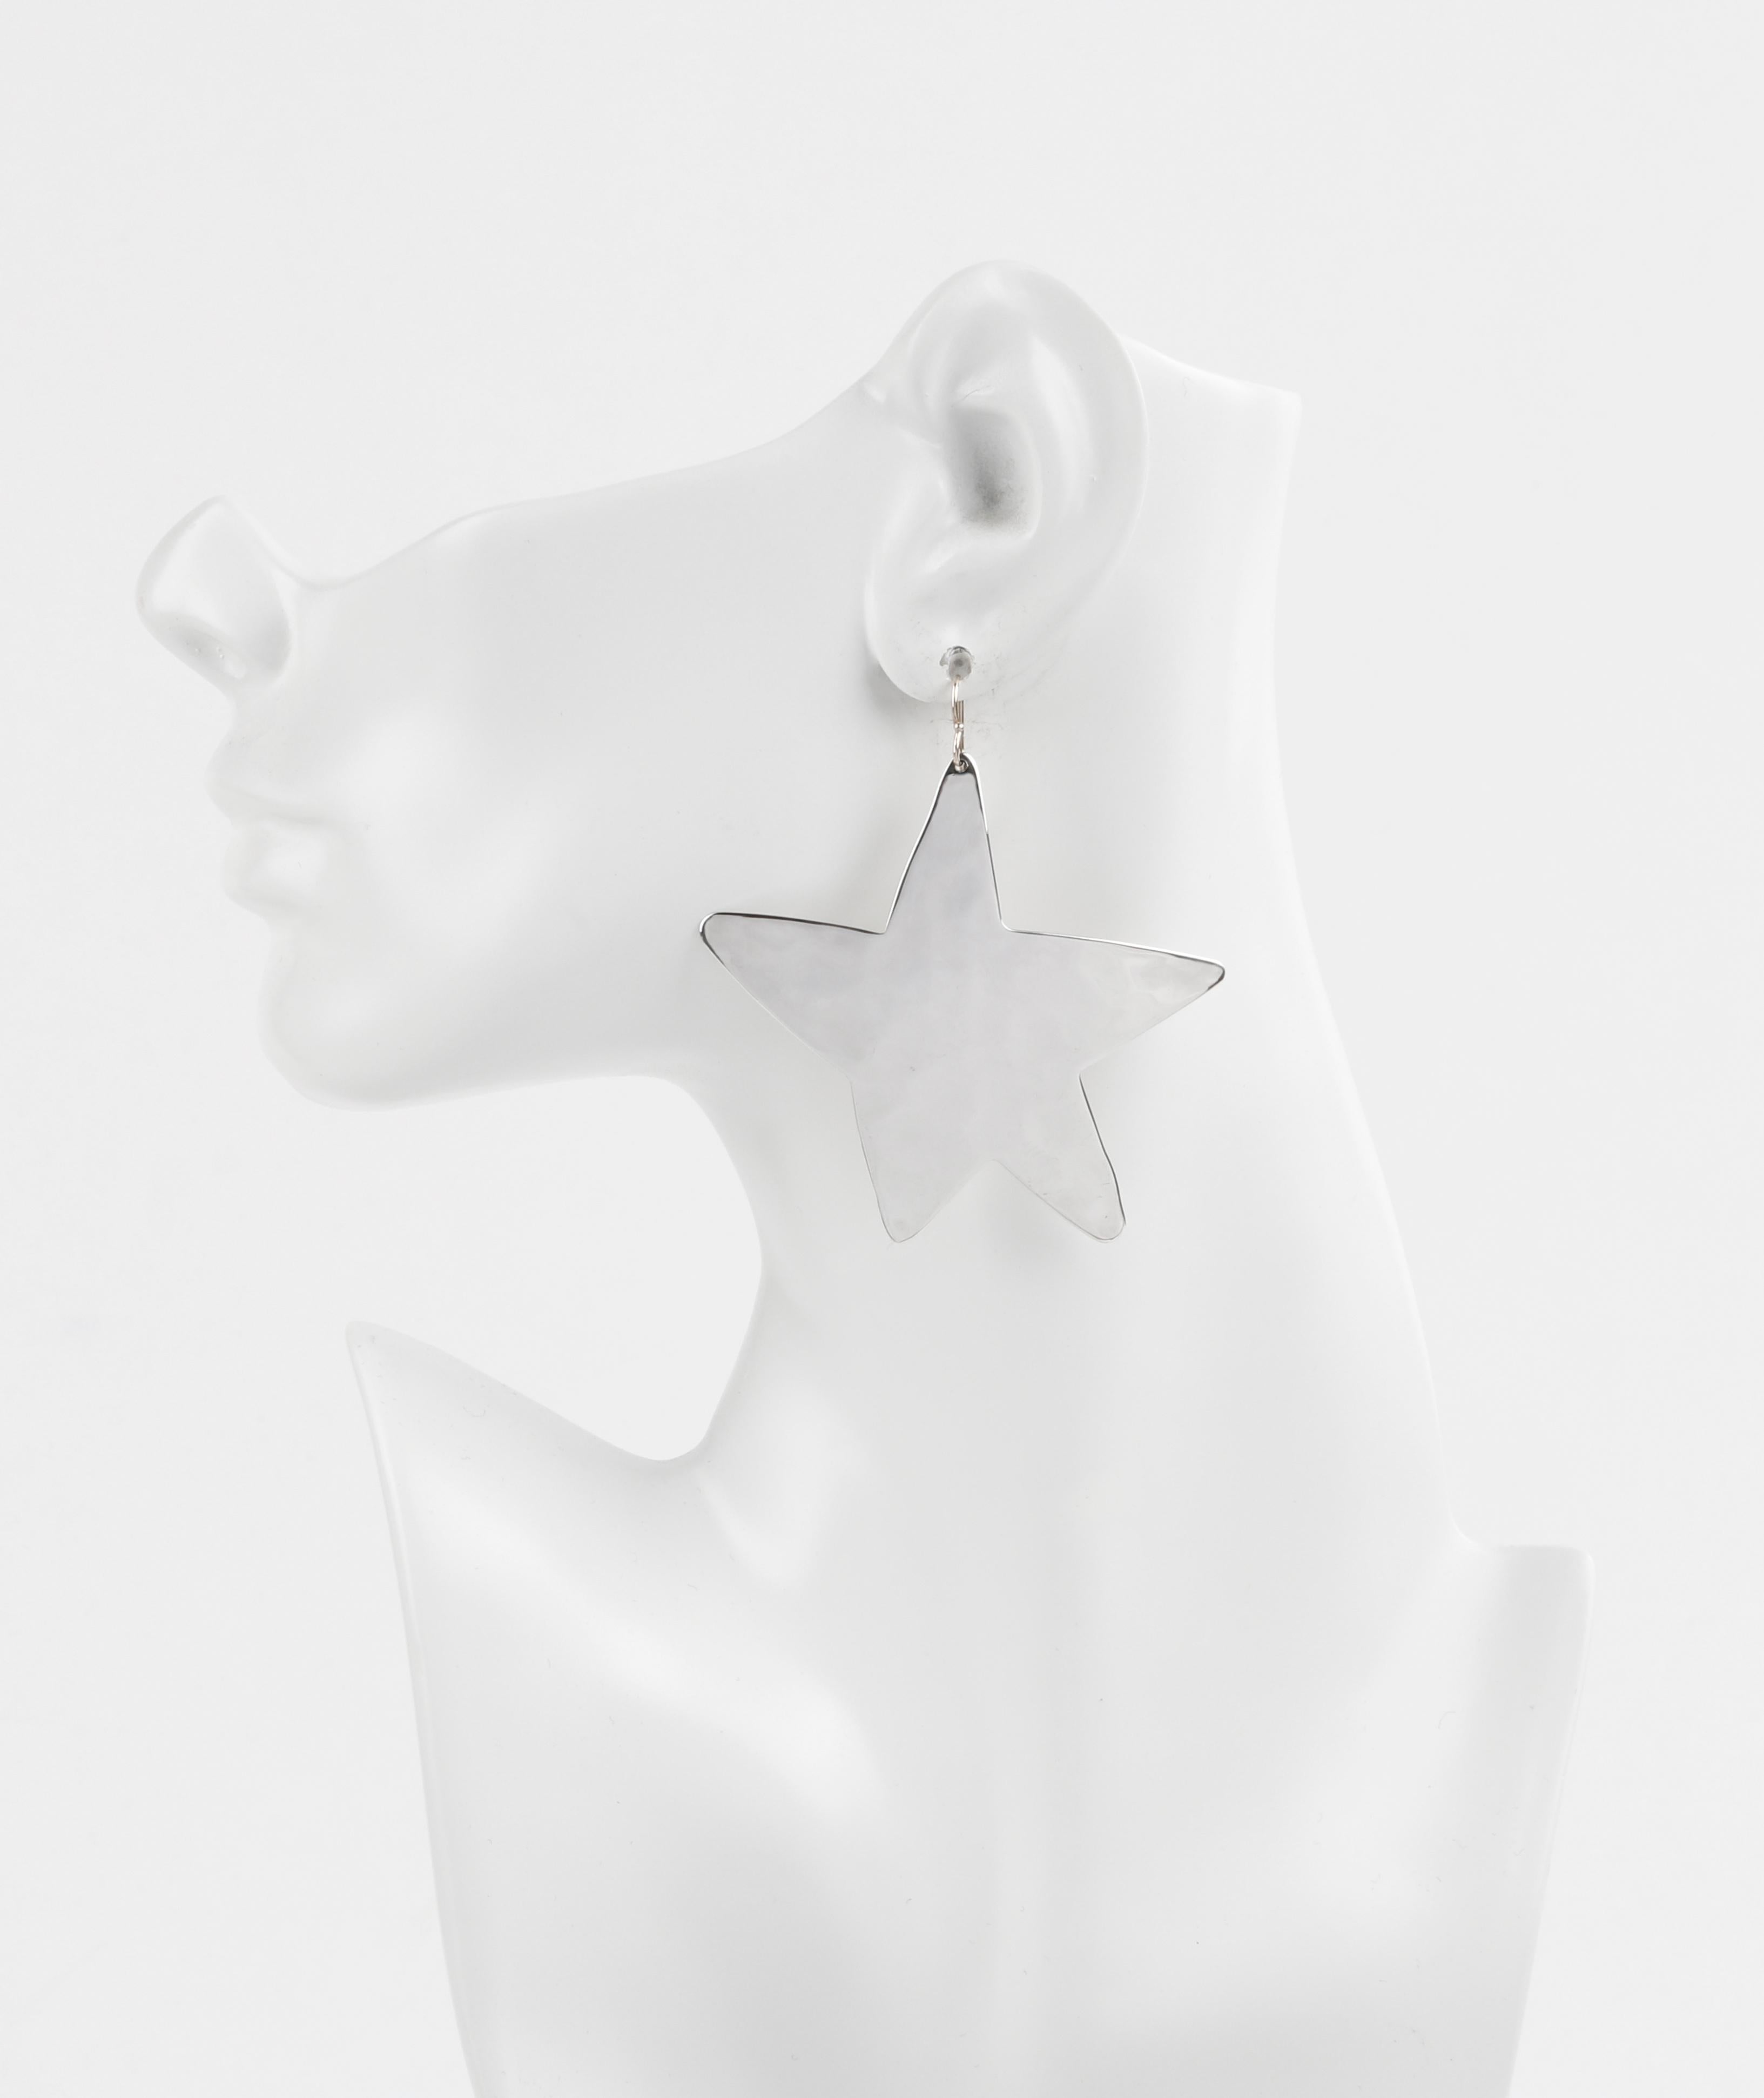 ROBERT LEE MORRIS Sterling Silver Andy Warhol Quote Stamped Star Large Drop Earrings
 
Brand / Manufacturer: Robert Lee Morris 
Collection: Andy Warhol Collection
Style: Drop earrings
Color(s): Silver
Marked Material: ‘“925” Sterling silver
Unmarked